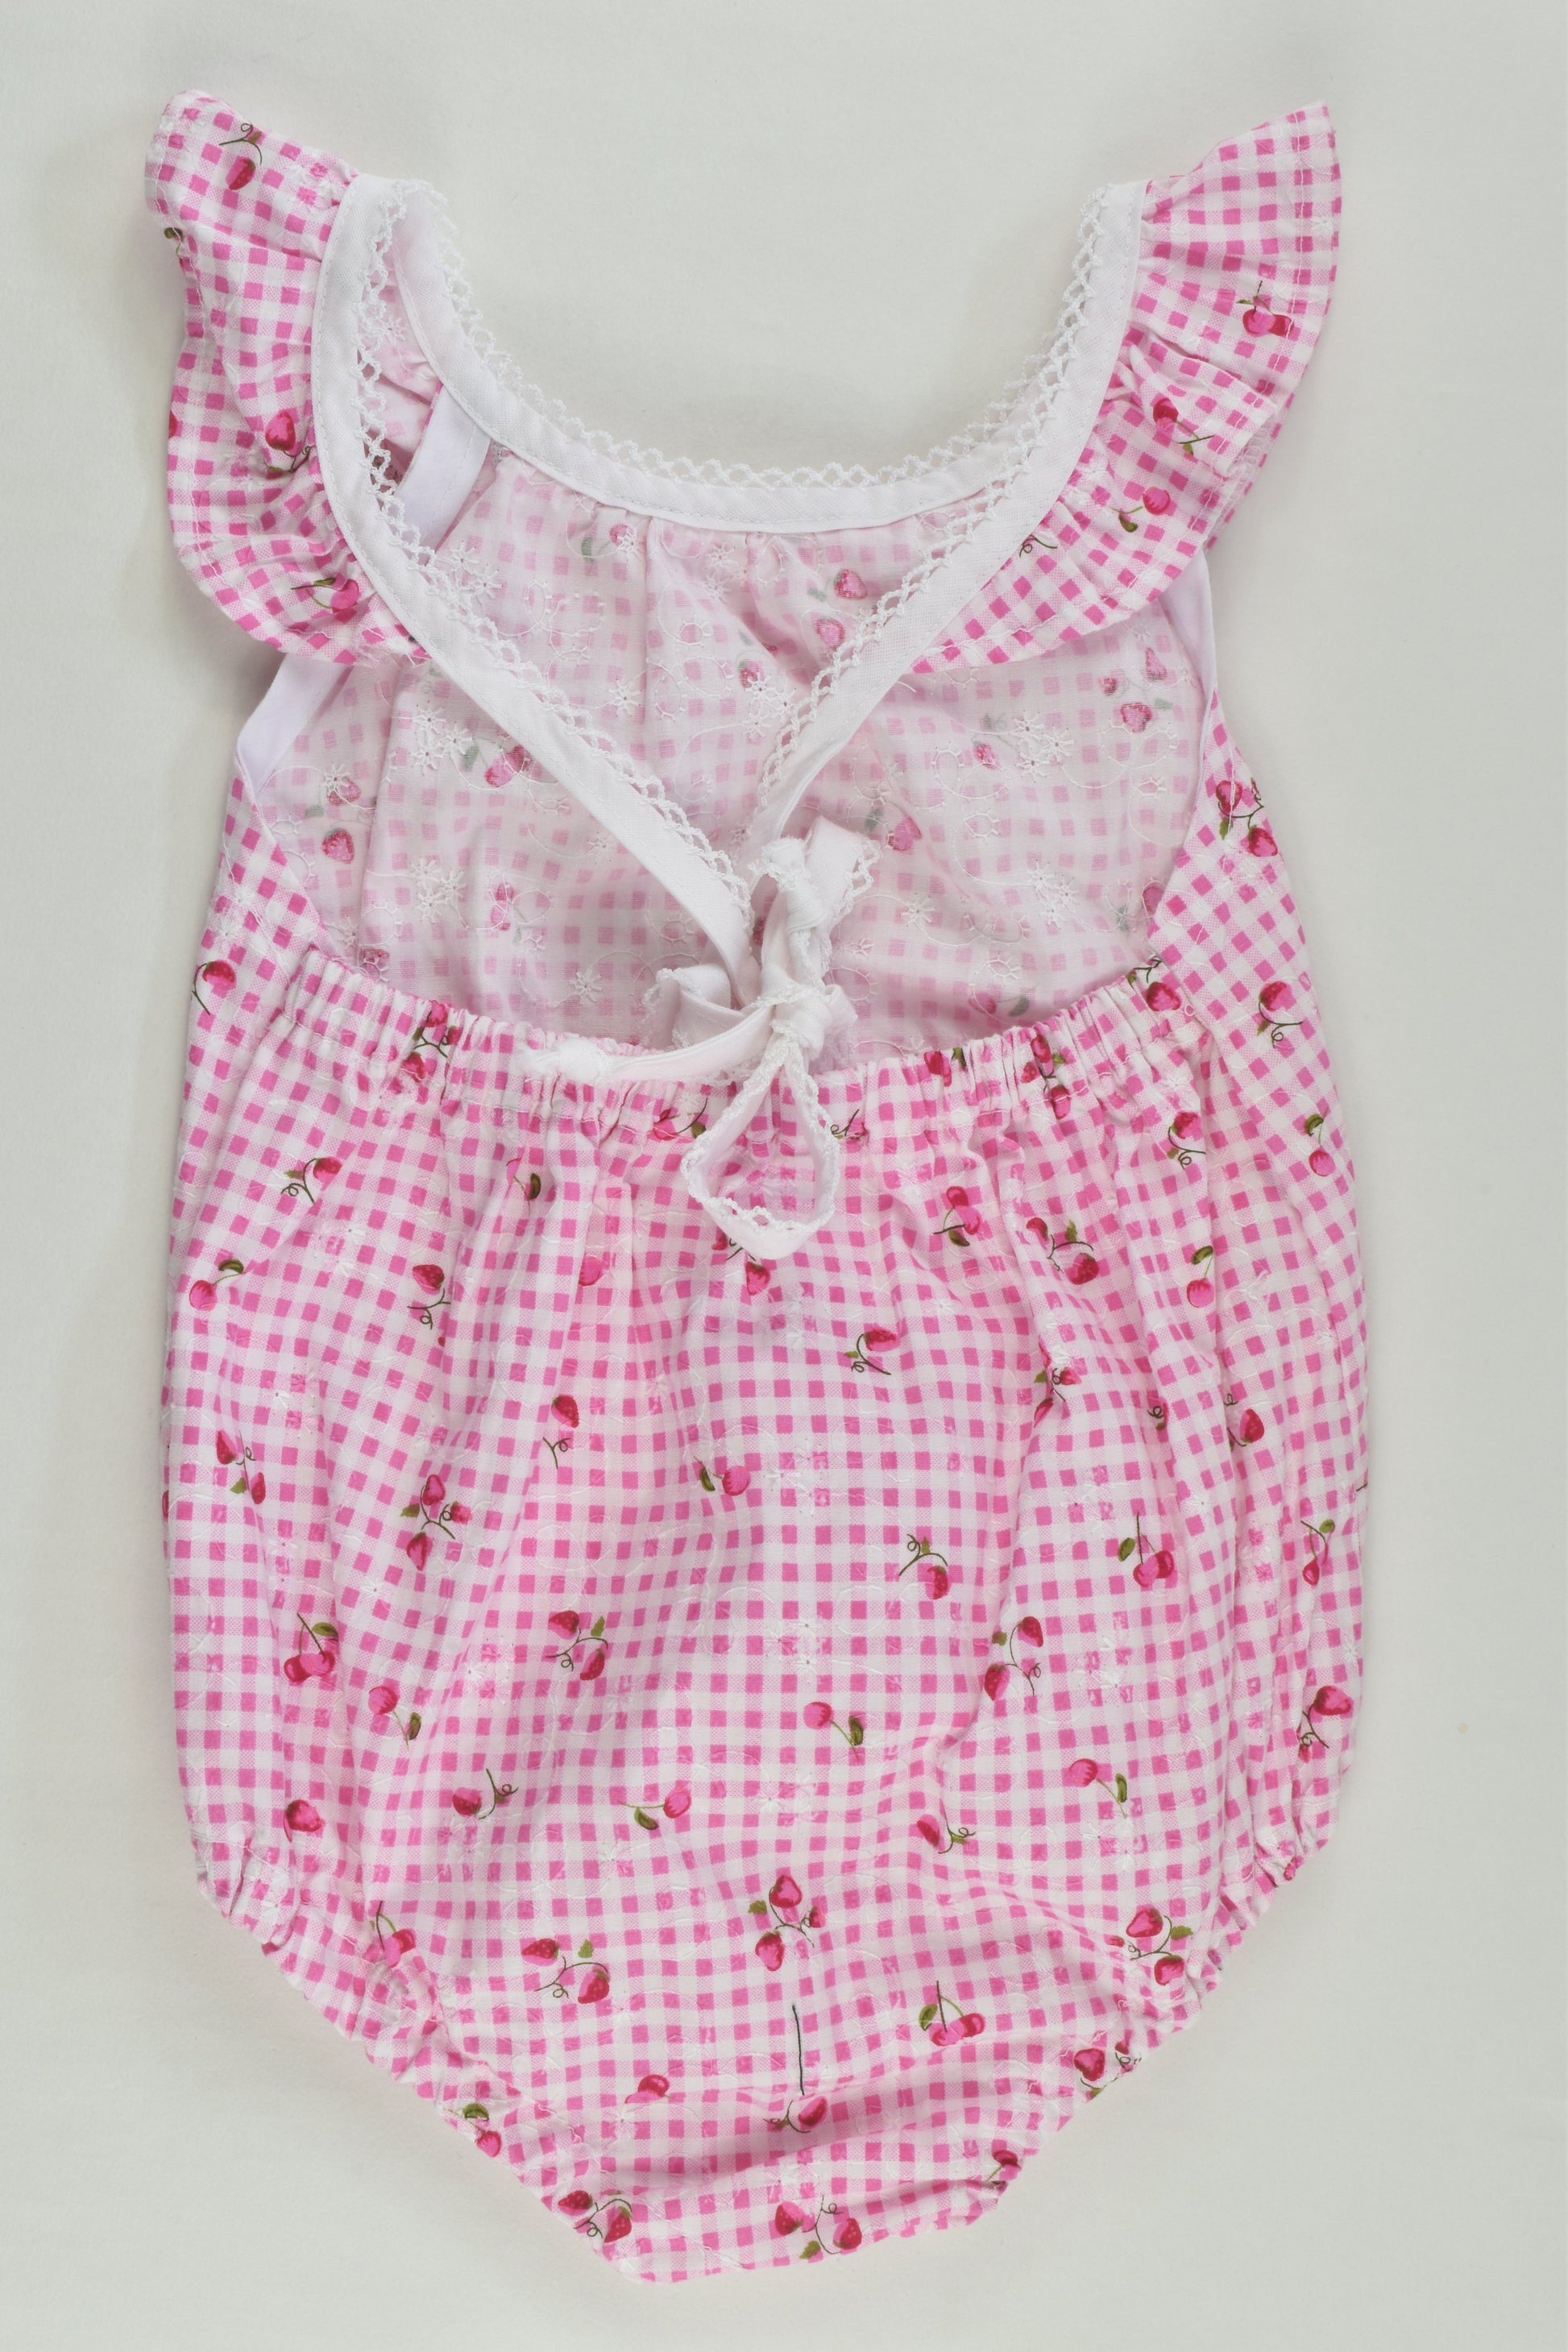 NEW Handmade Size approx 00 Strawberries and Cherries Bubble Romper